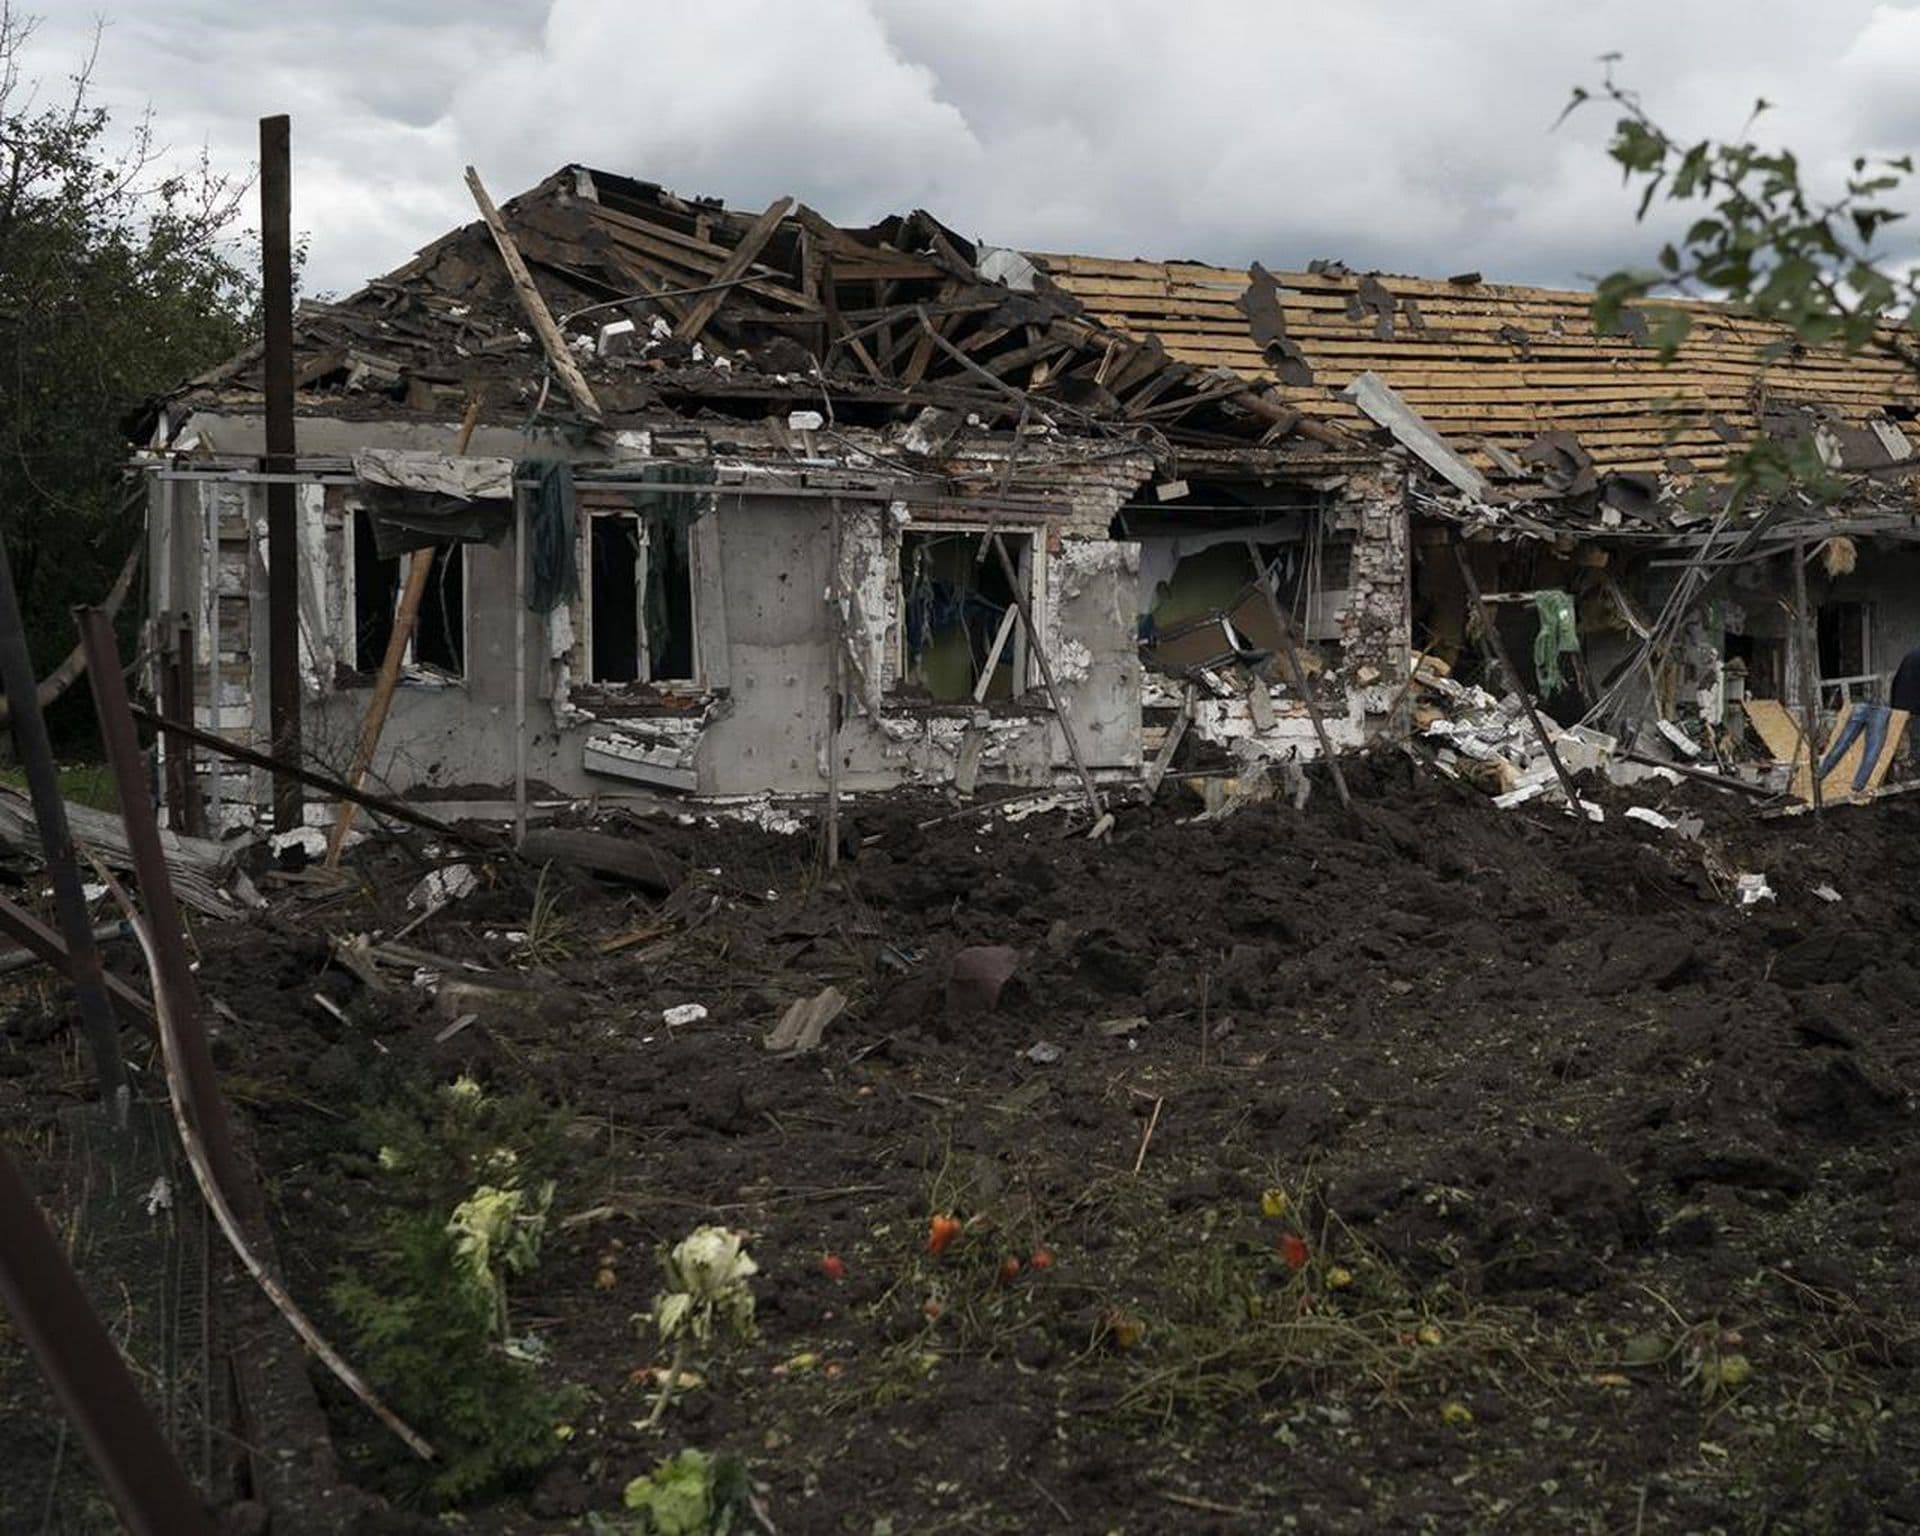 A man walks over the debris of a house that was heavily damaged after a Russian attack in Sloviansk